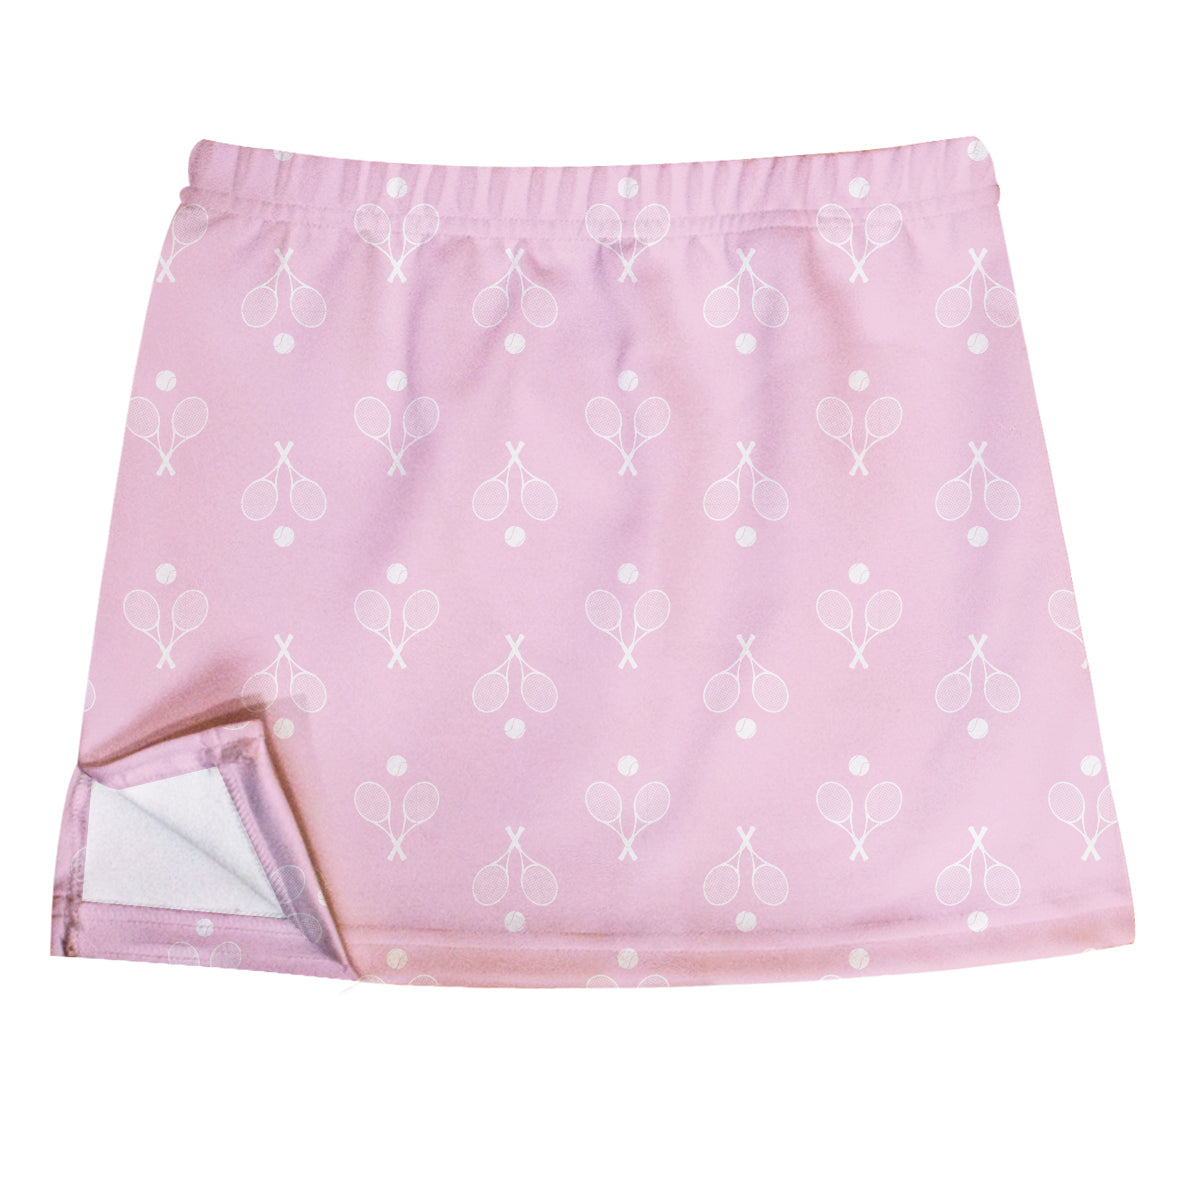 Tennis Raquets Pink Skort With Side Vents